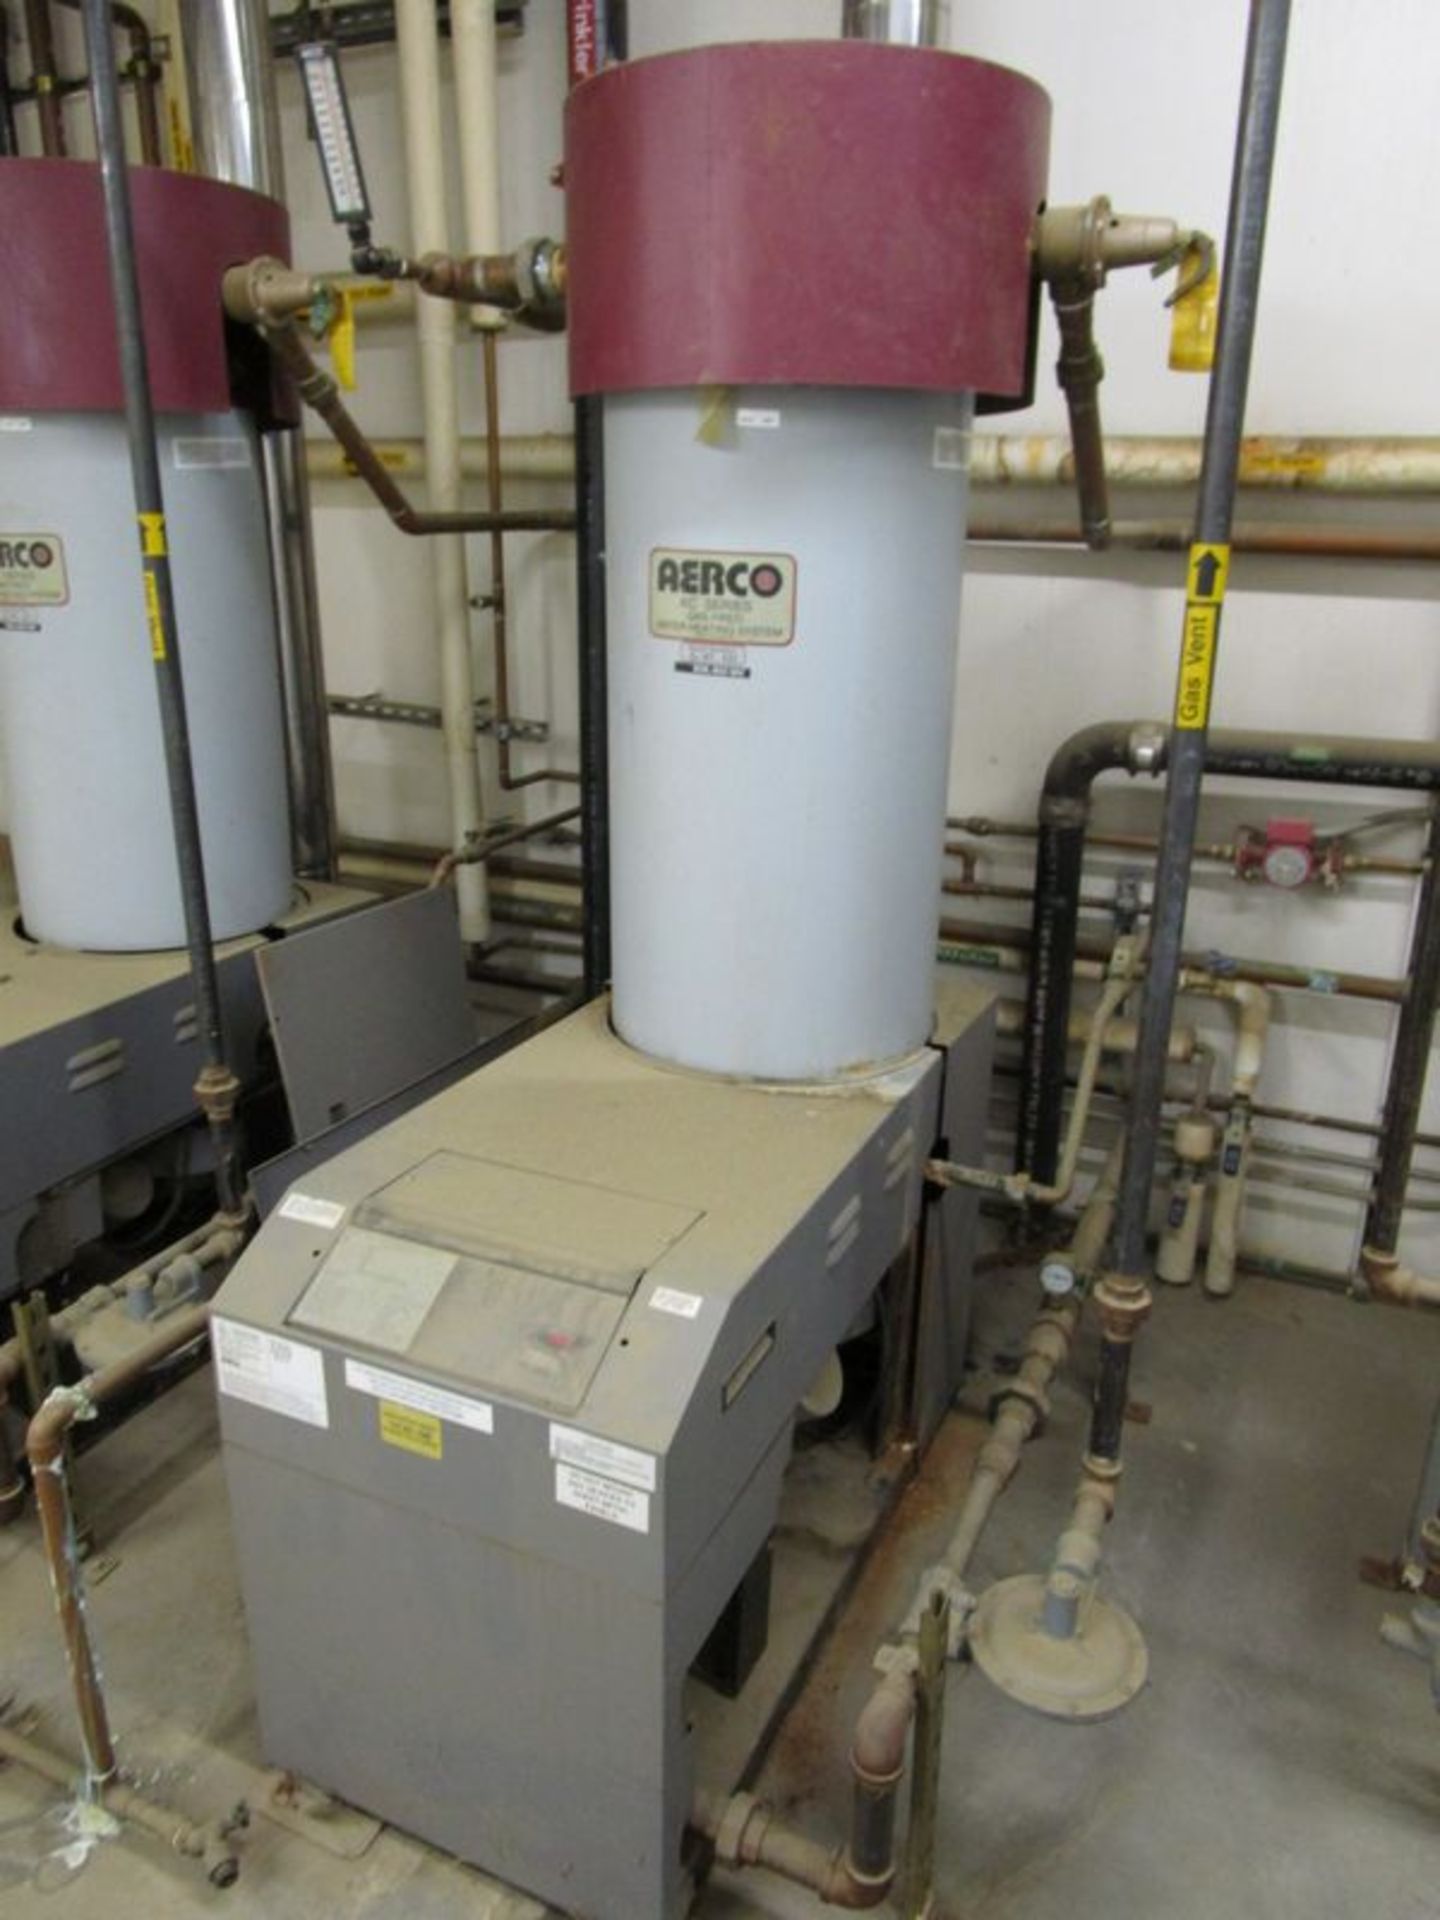 Aerco Model KC Series  Hot Water Boiler , Serial Number: G-97-032  (1997)Gas Fired Water Heater, - Image 2 of 6